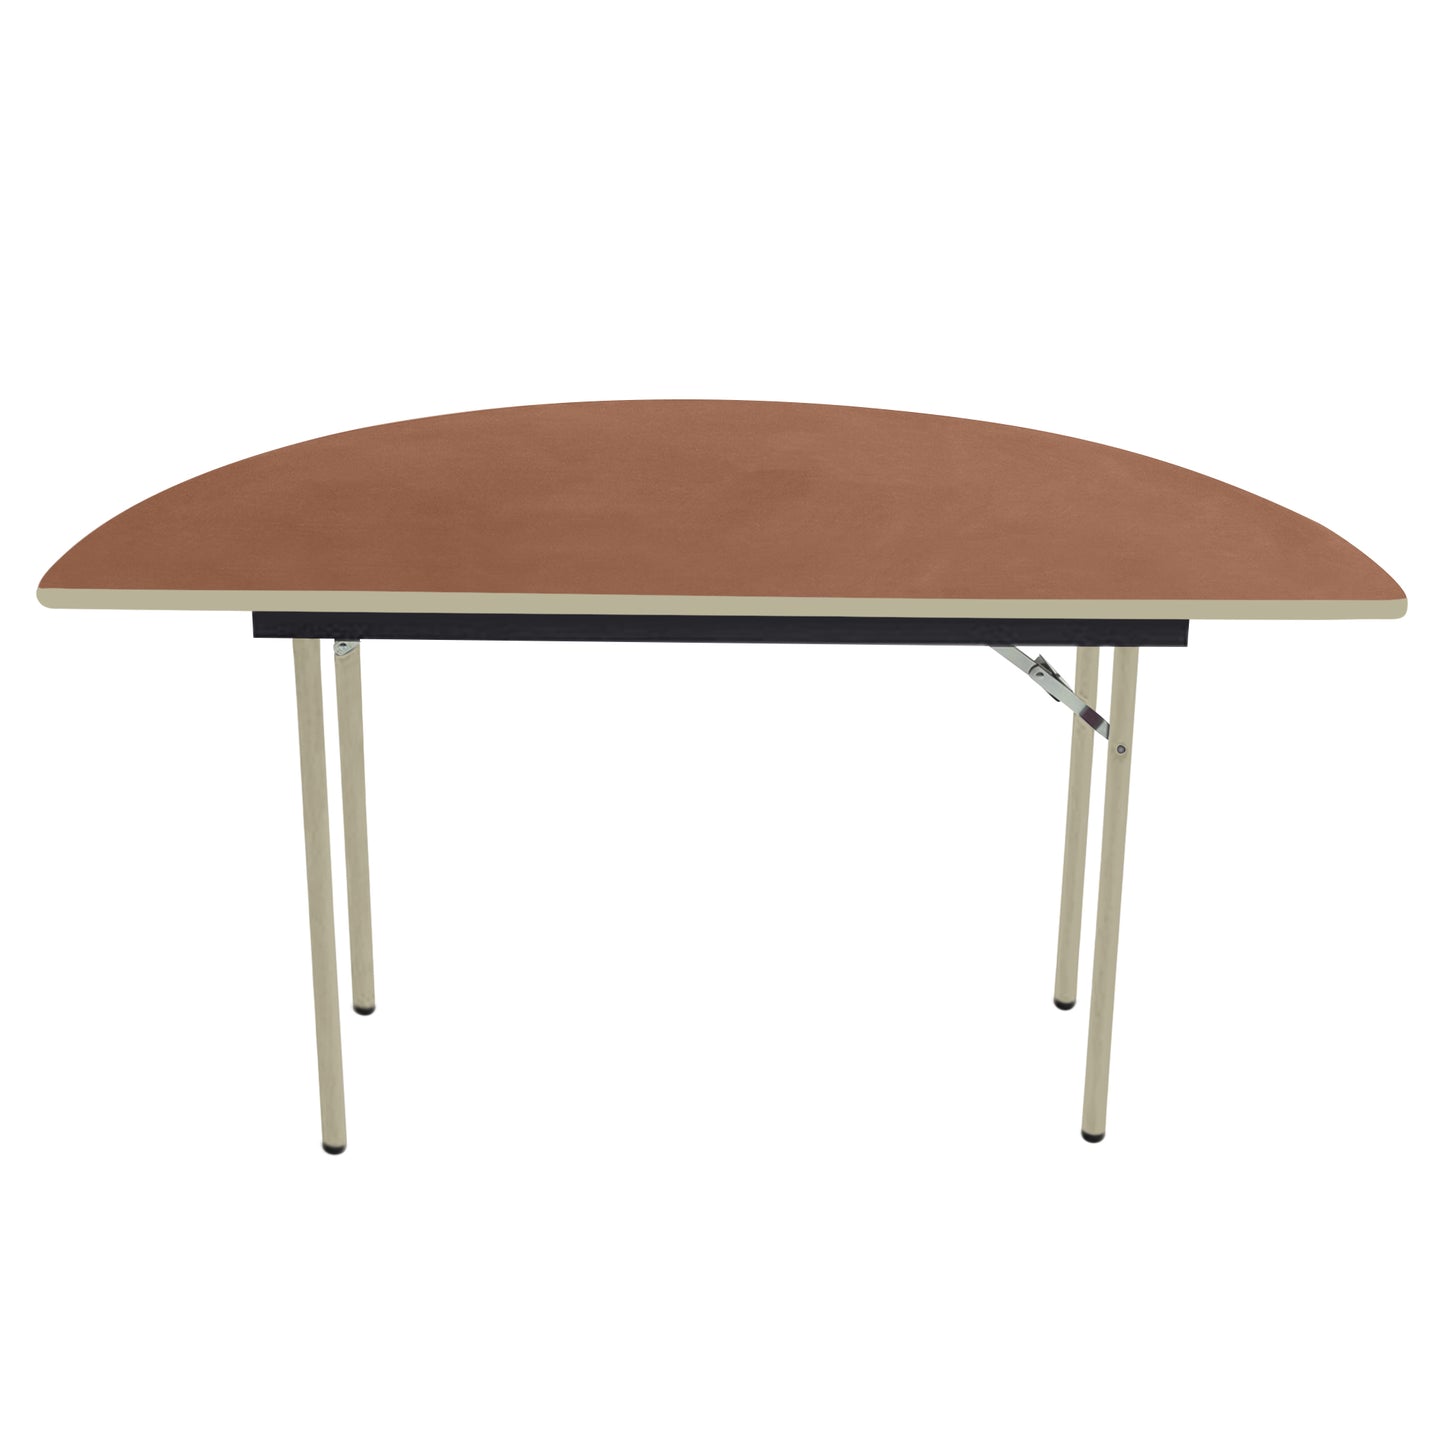 AmTab Folding Table - Plywood Stained and Sealed - Vinyl T-Molding Edge - Half Round - Half 48" Diameter x 29"H  (AmTab AMT-HR48PM)